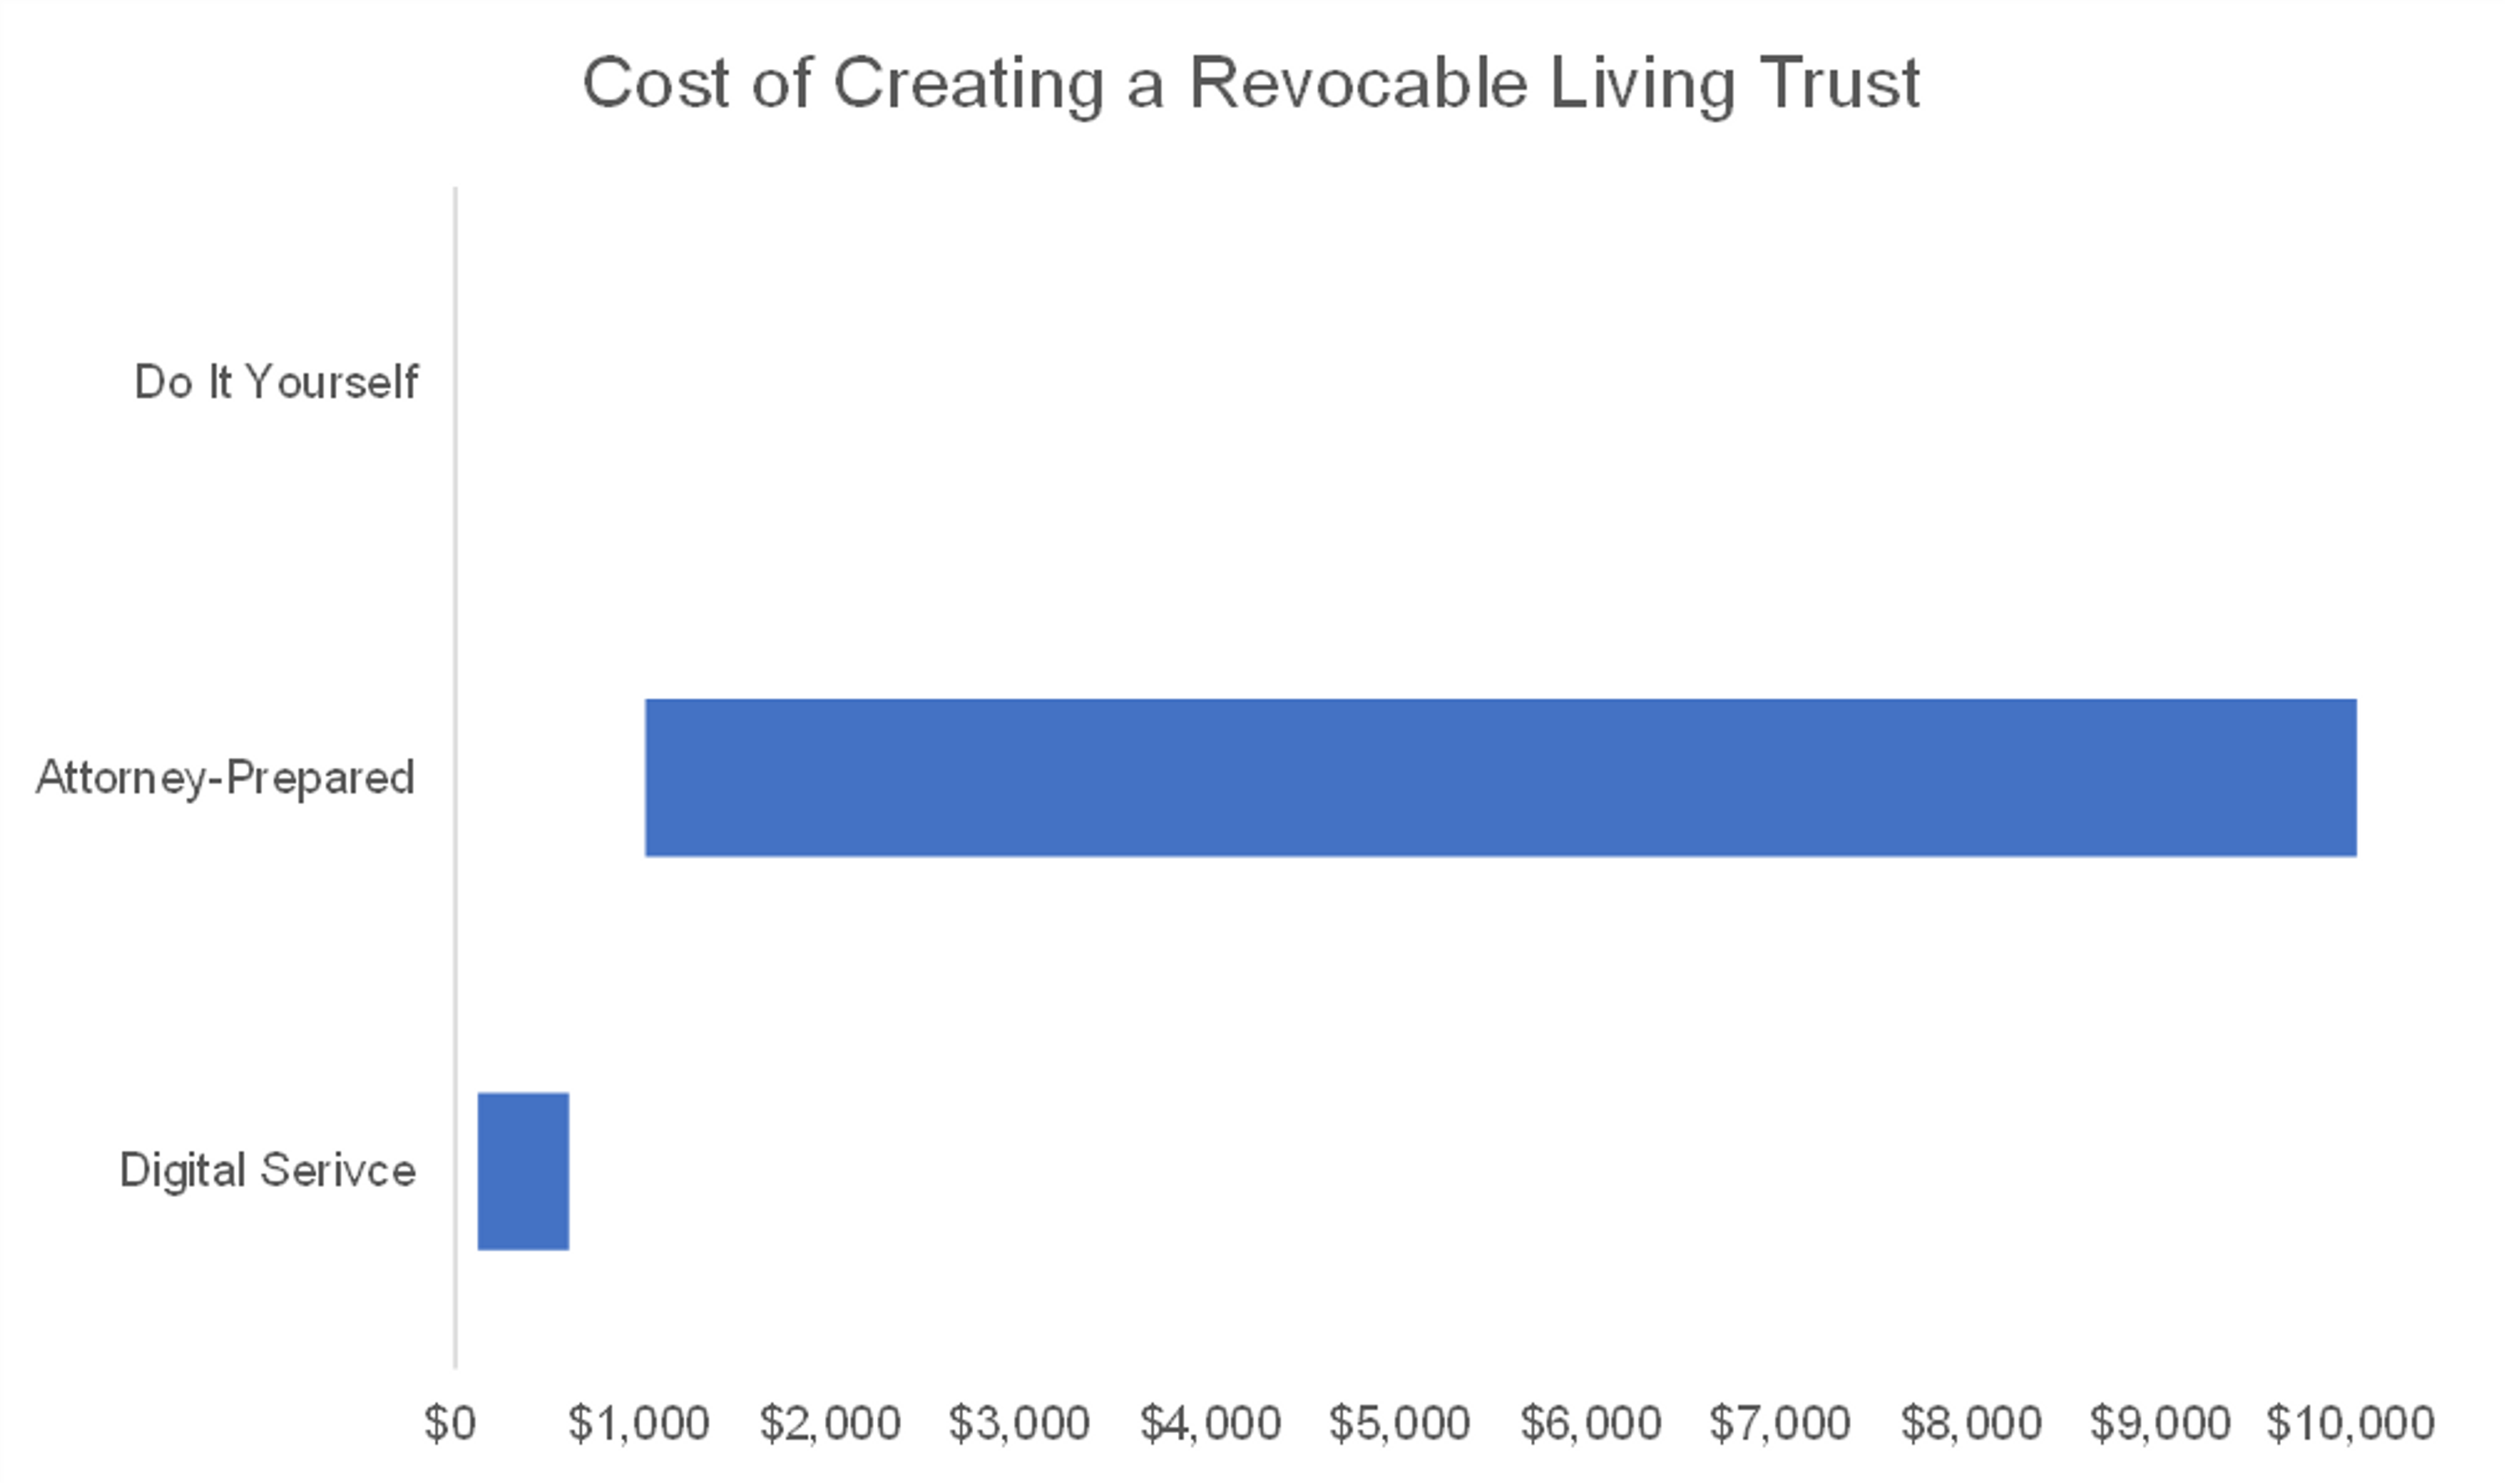 Creating a revocable trust with an attorney costs between $1,000 and $10,000. Creating a revocable trust with a digital service costs between $120 and $600. 